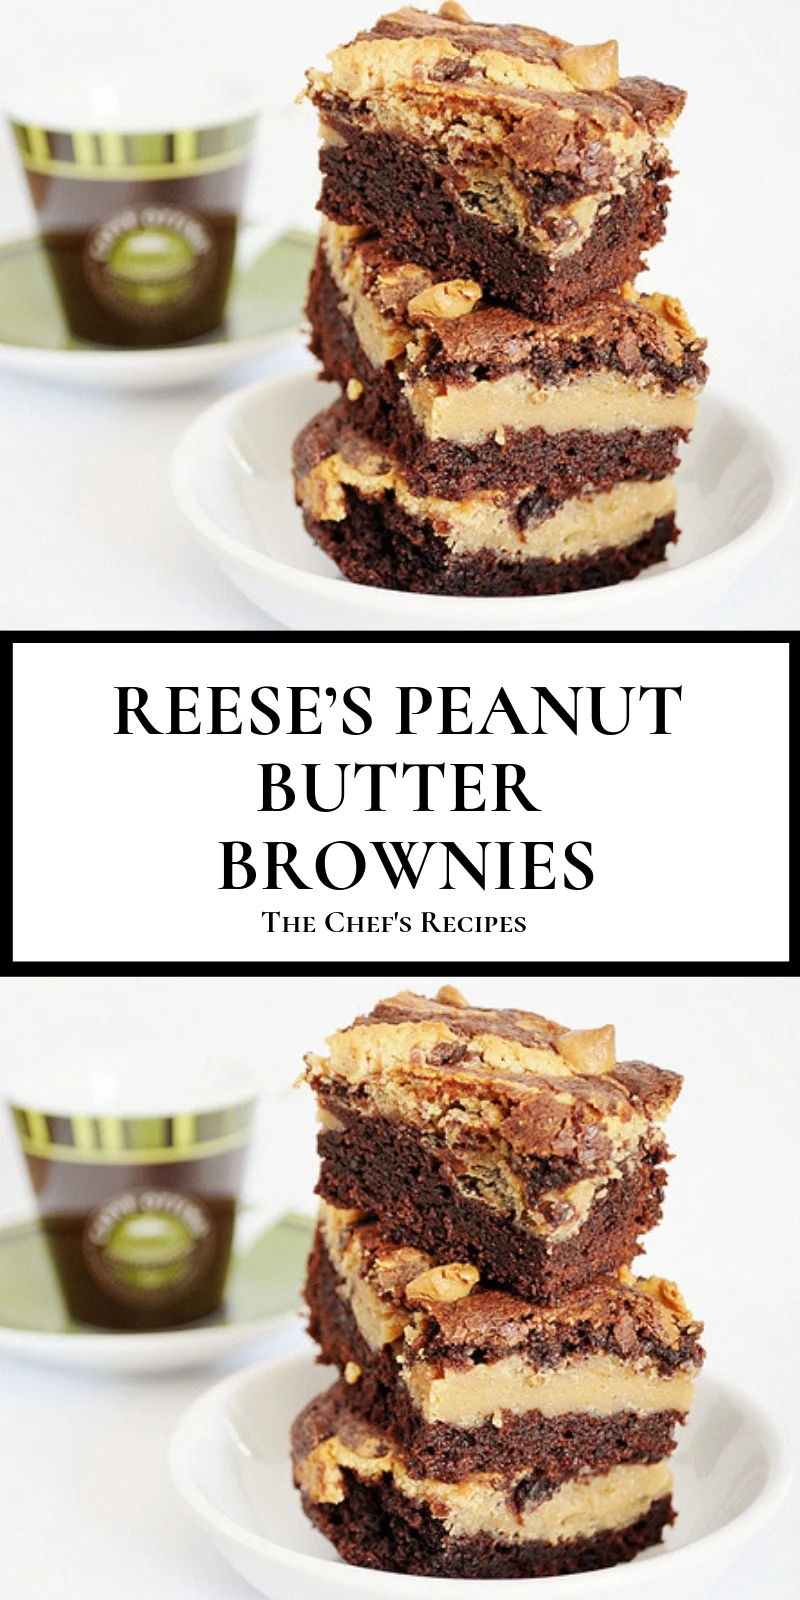 REESE’S PEANUT BUTTER BROWNIES